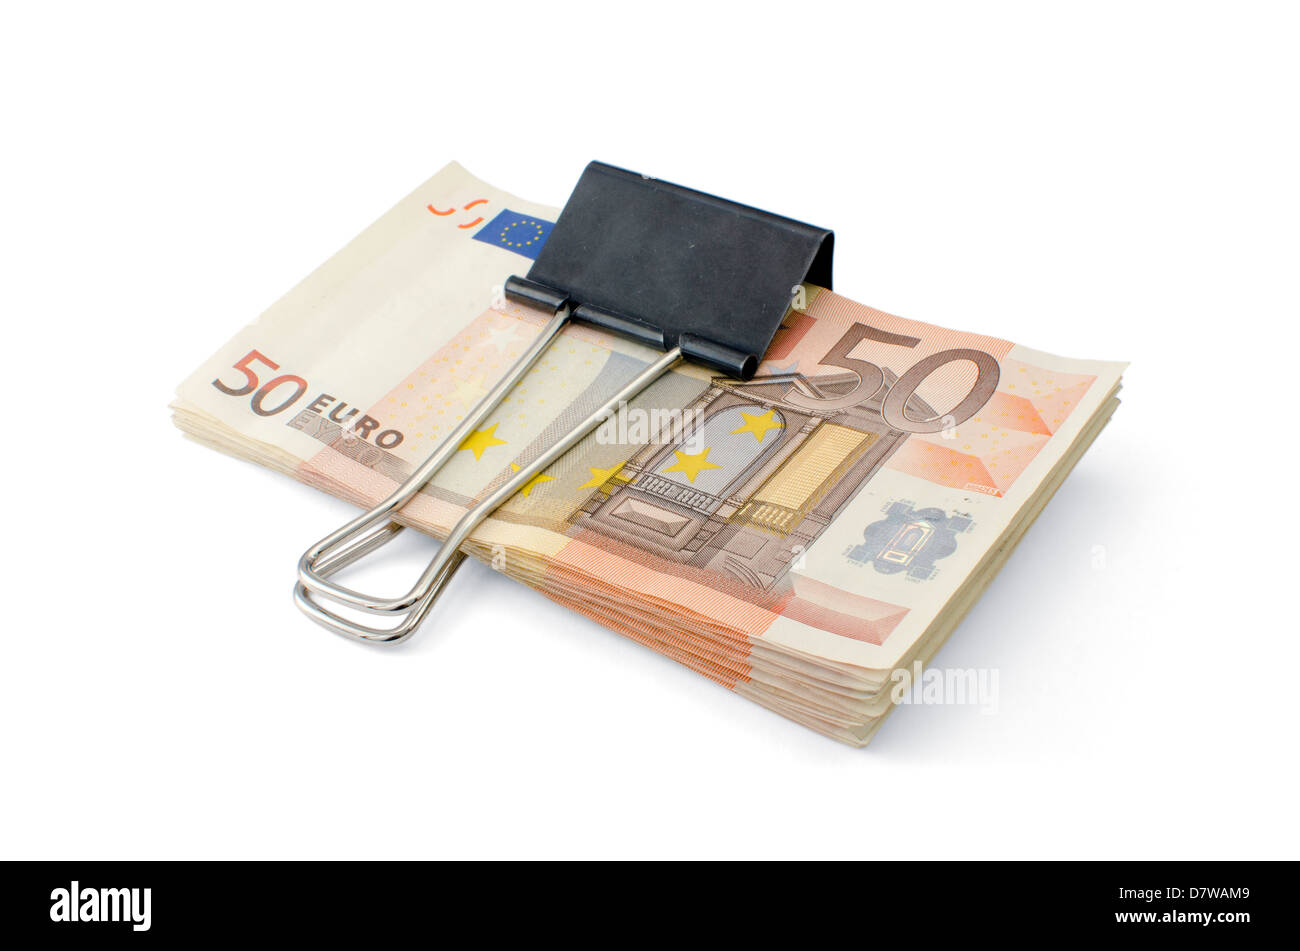 Tightening up on your money. Euro banknotes Stock Photo